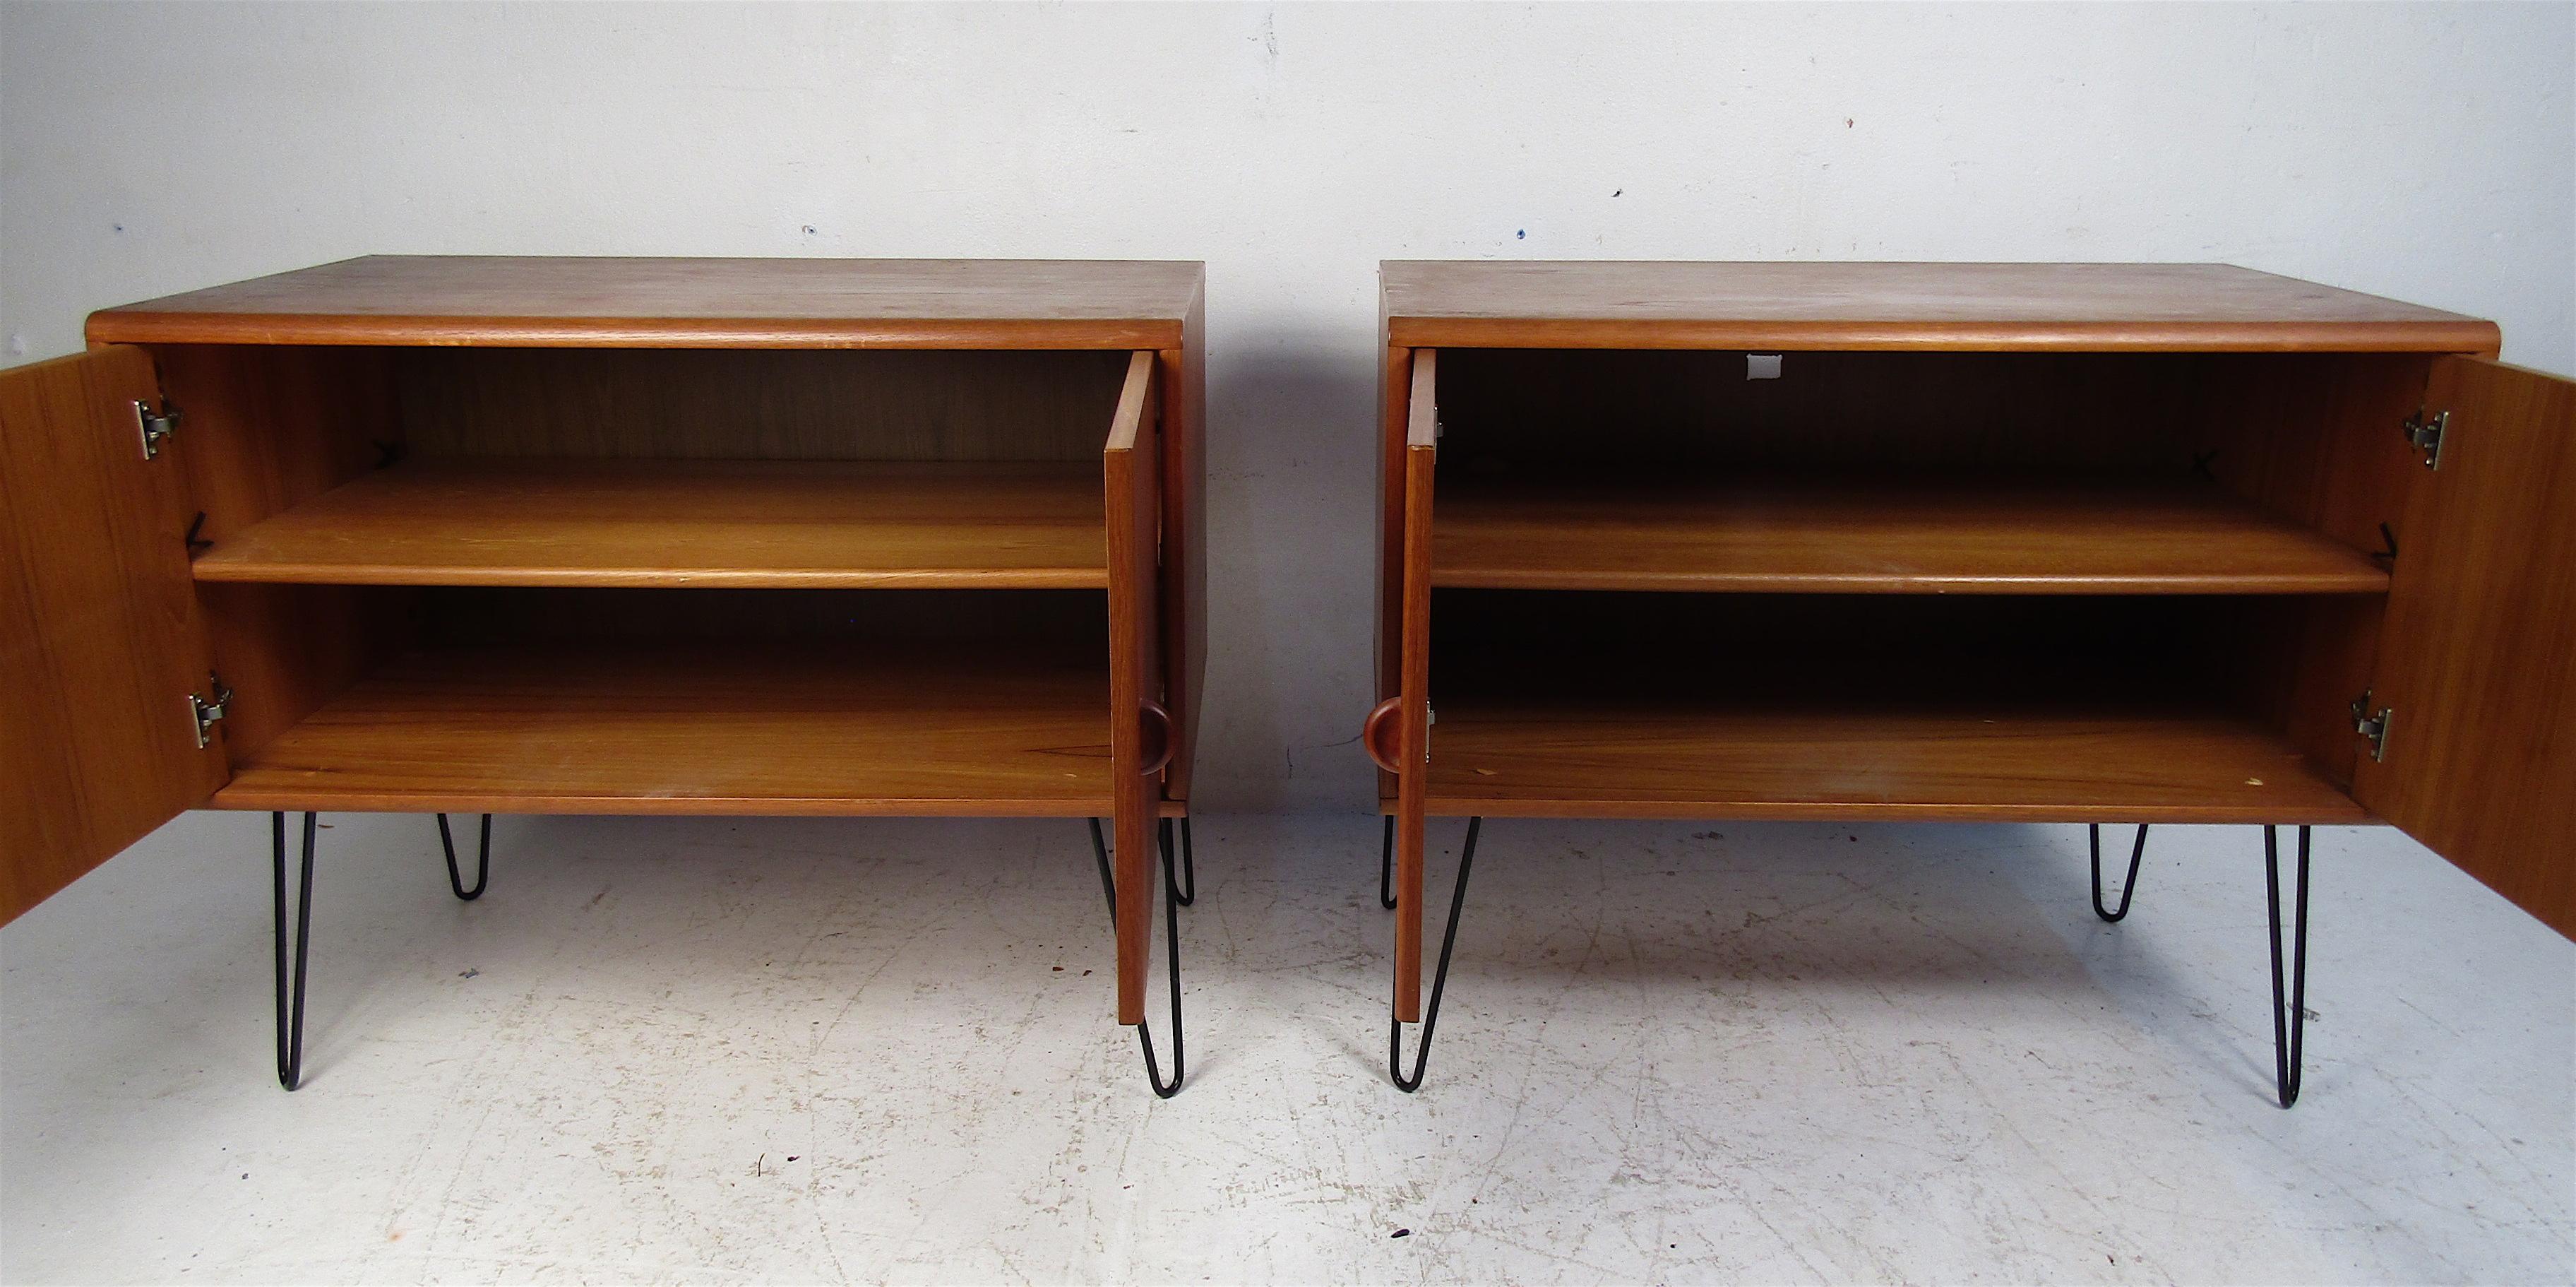 Pair of Midcentury Teak Cabinets with Hairpin Legs In Good Condition For Sale In Brooklyn, NY